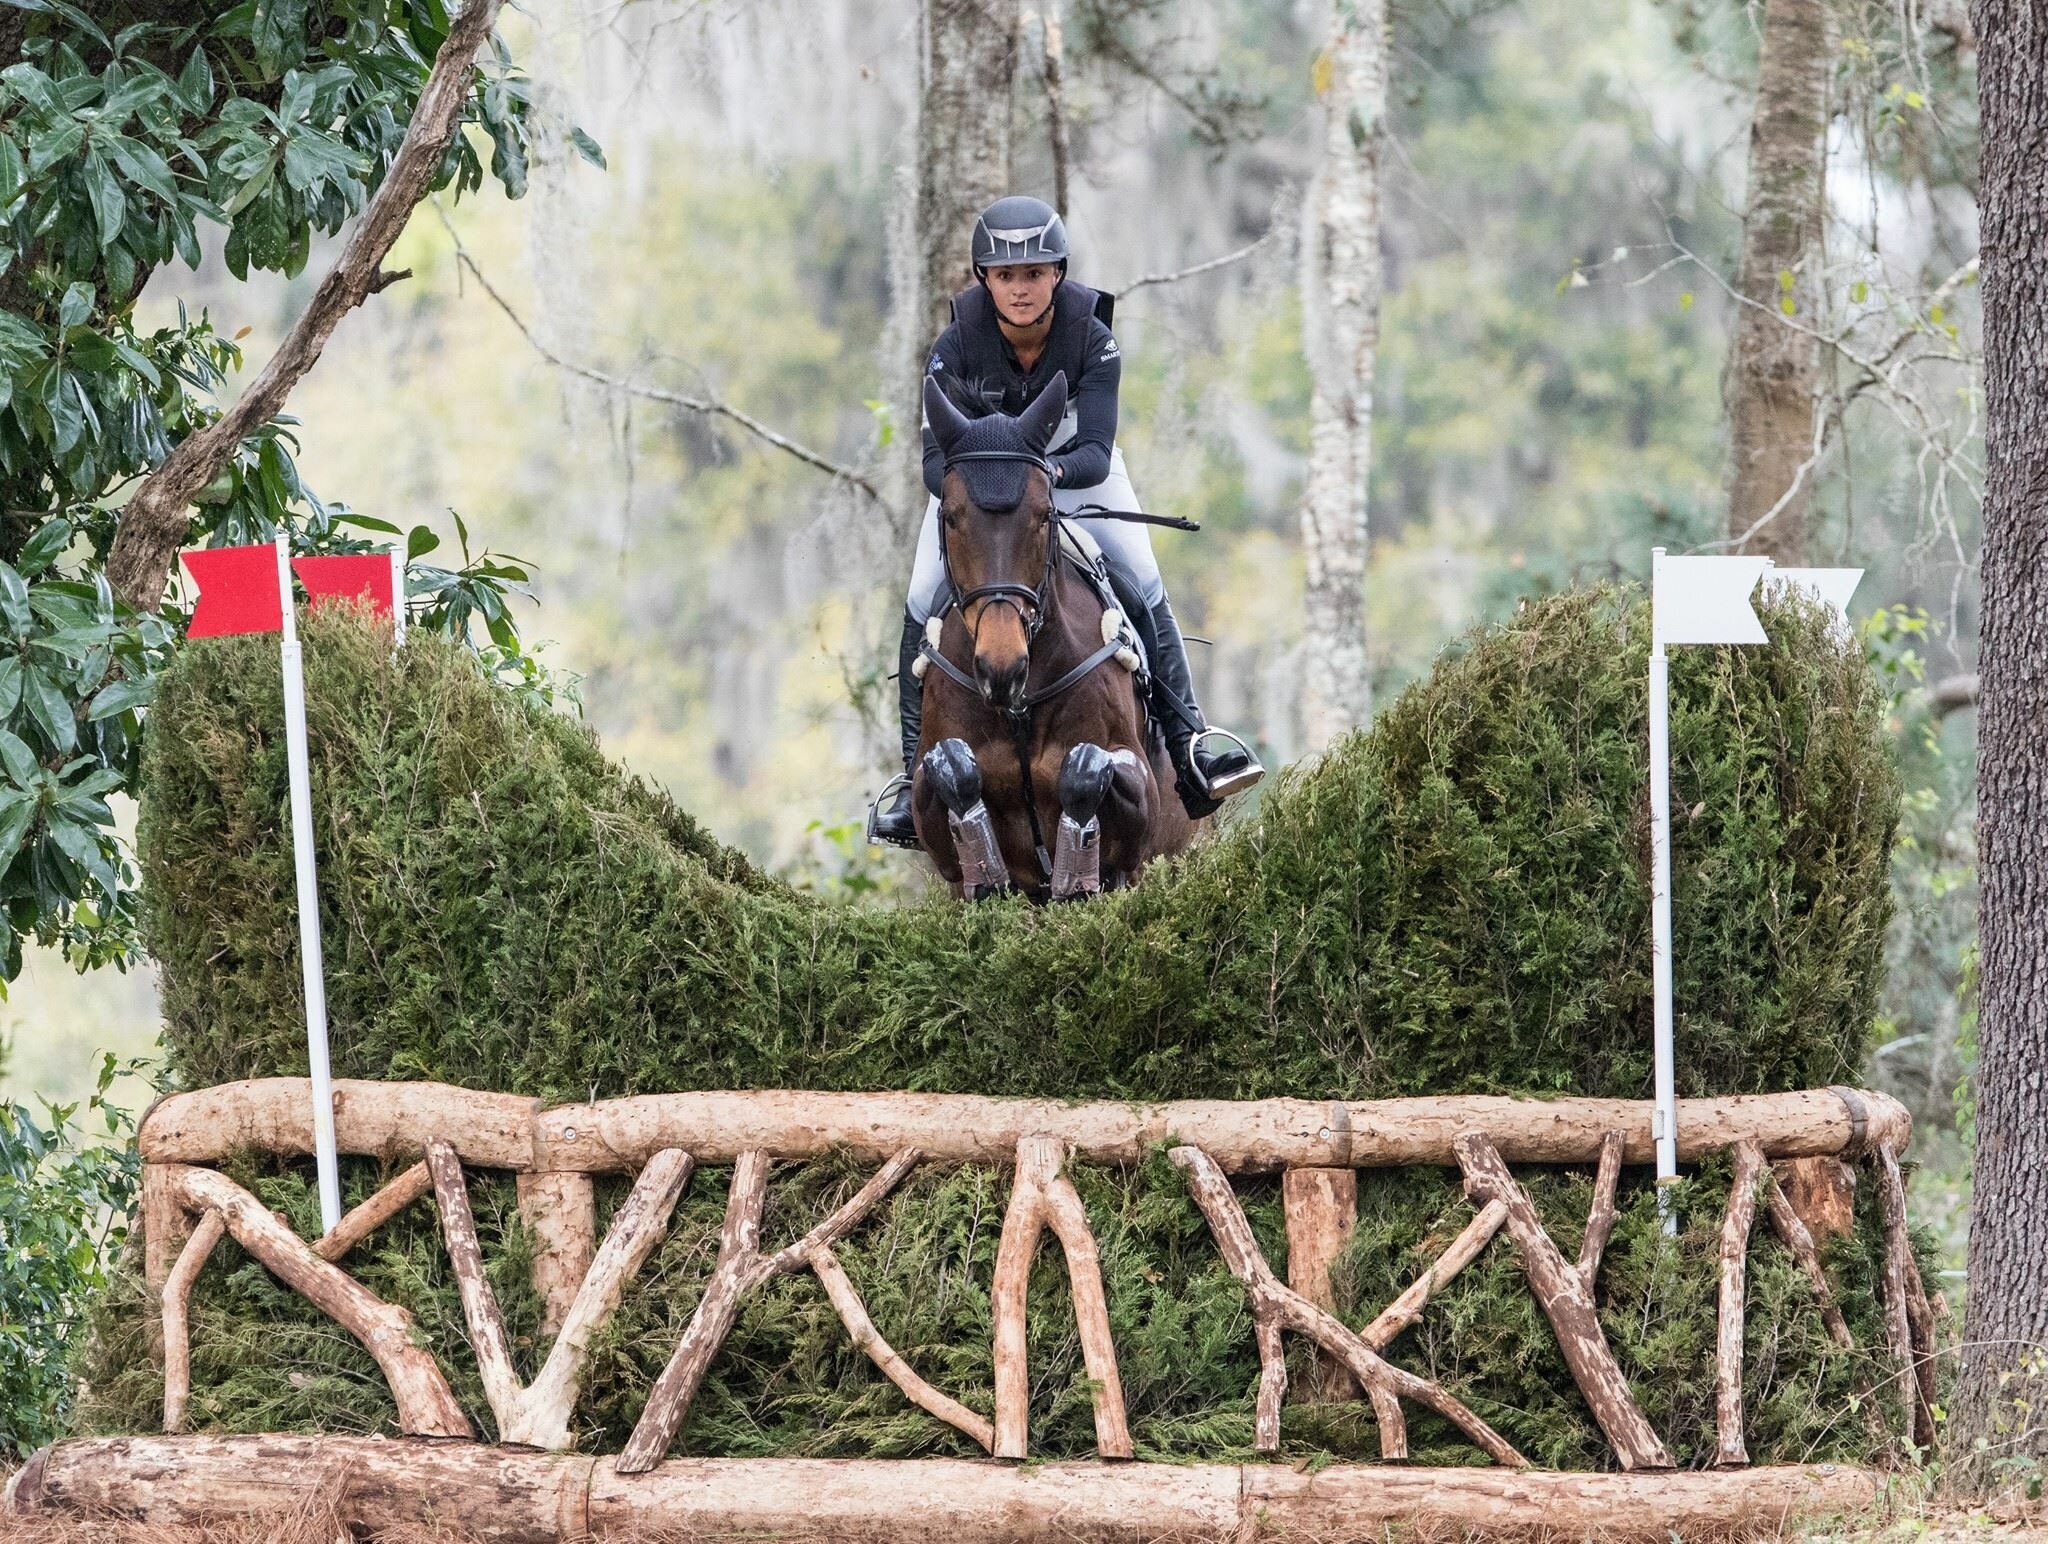 High Performance Eventing